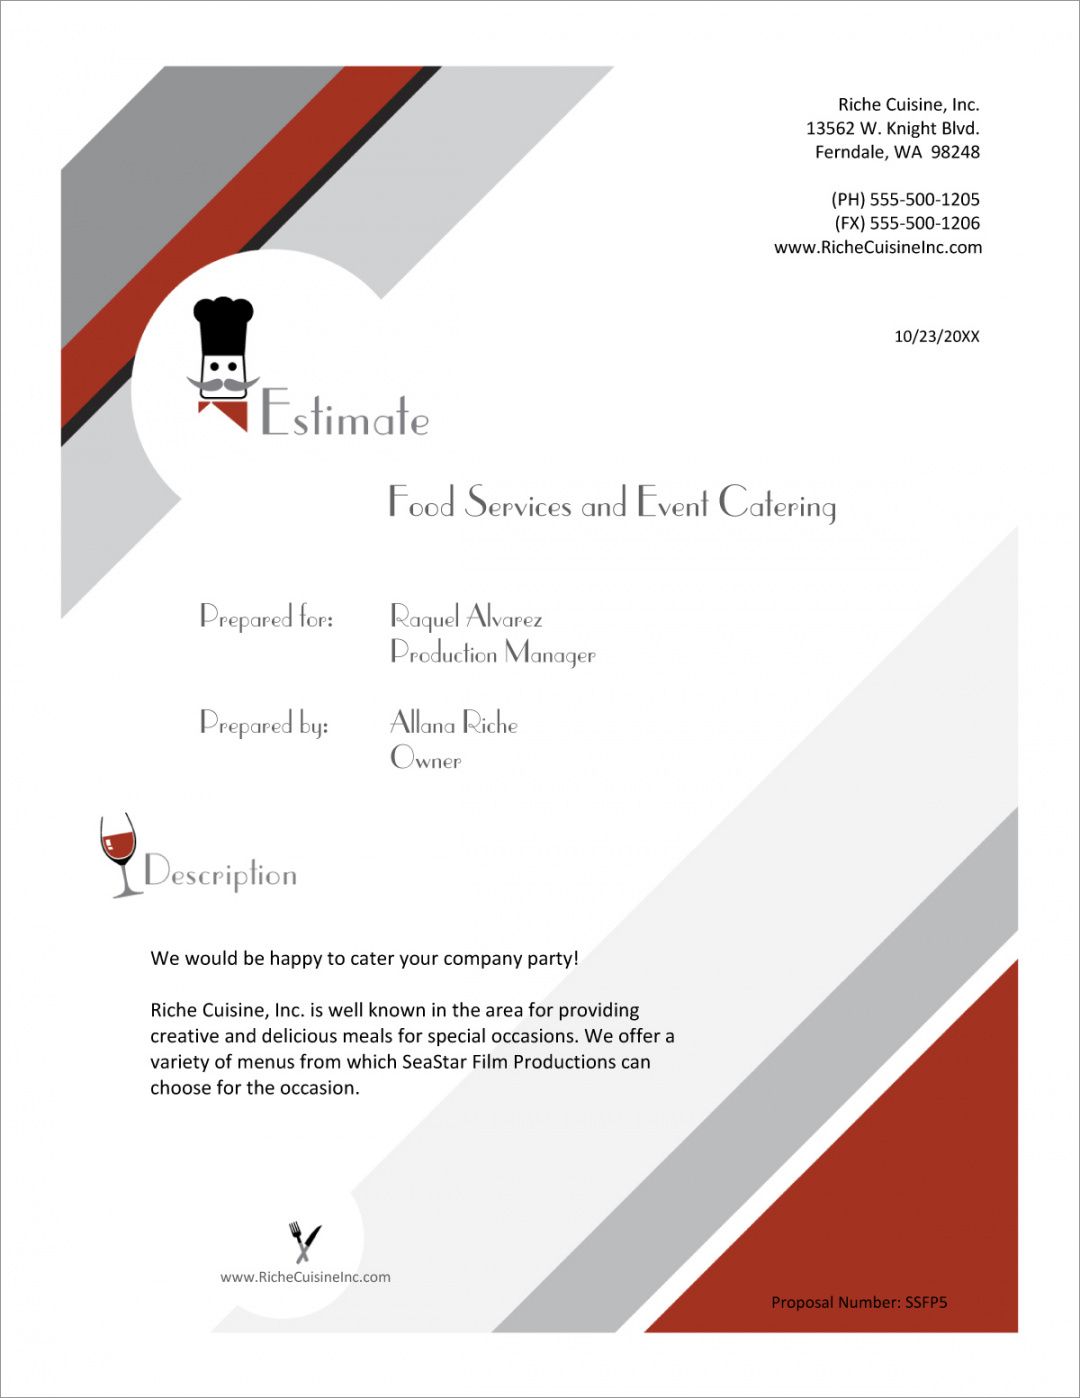 free food services catering sample proposal  5 steps catering business proposal template example